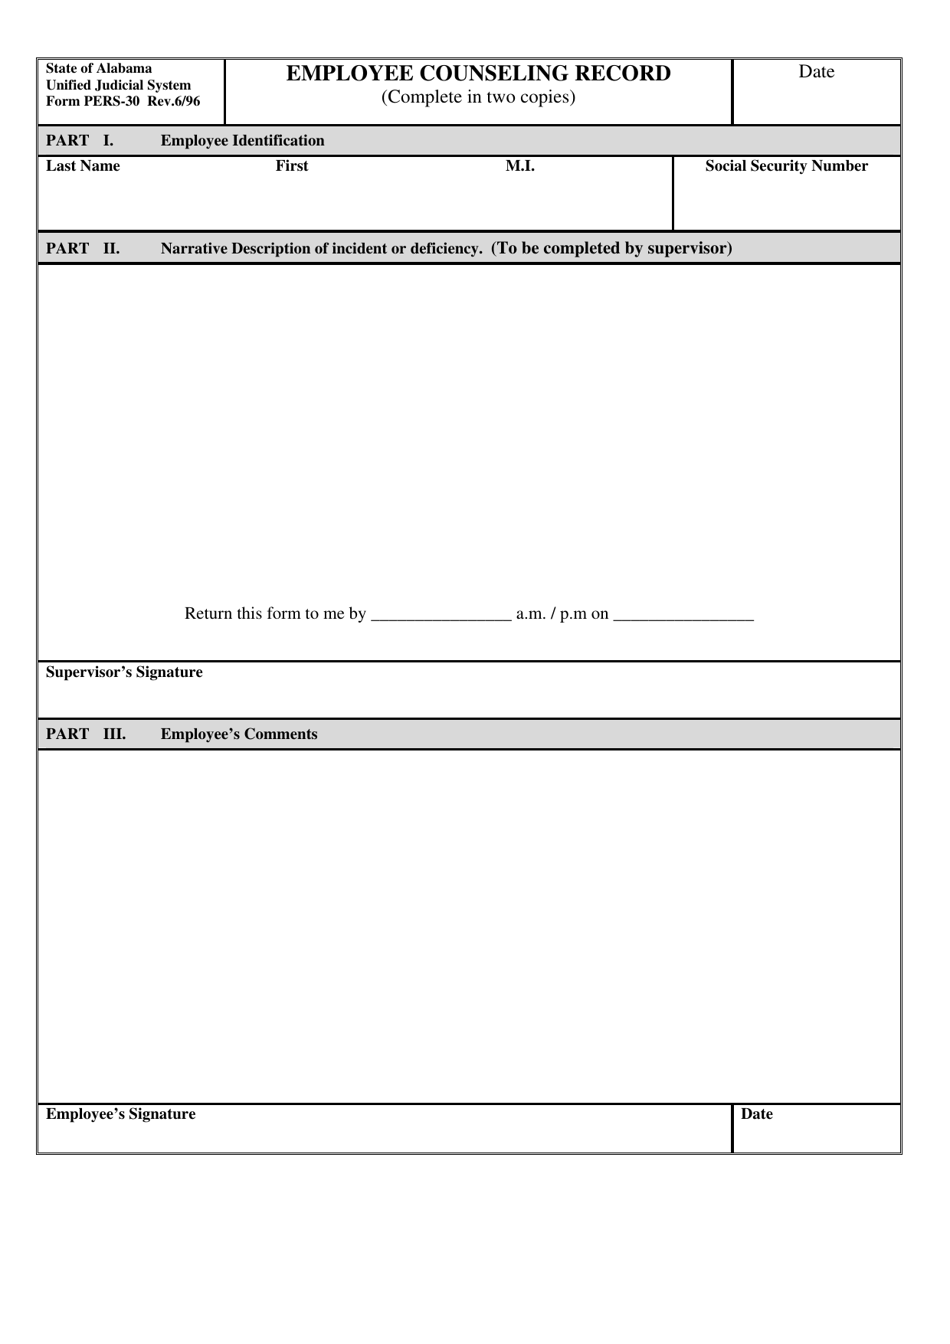 Form PERS-30 Employee Counseling Record - Alabama, Page 1